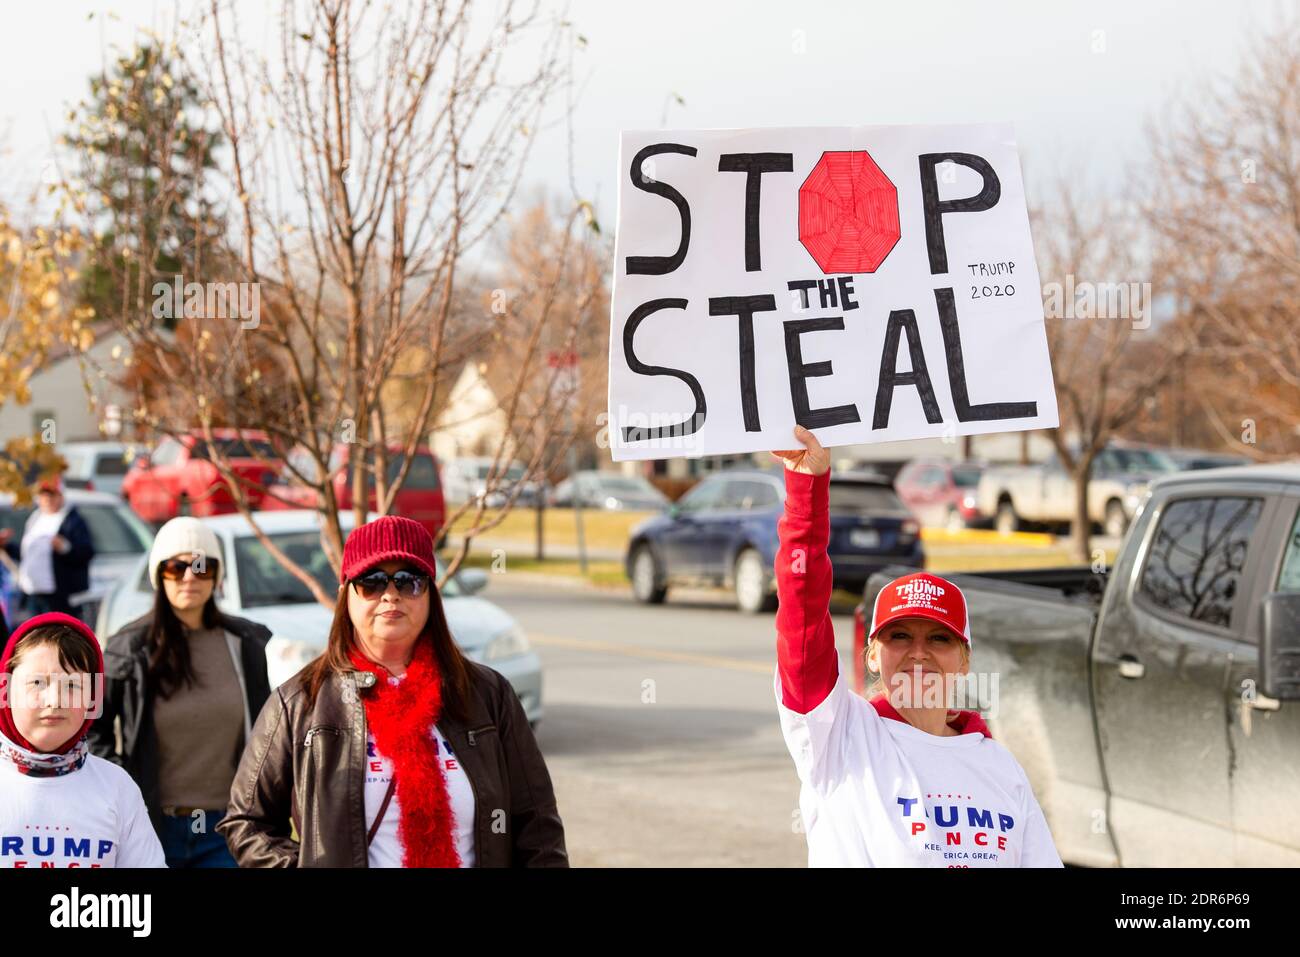 Helena, Montana - Nov 7, 2020: Woman protesting at Stop the Steal rally holding sign, Wearing Trump 2020 gear believing the election was stolen from D Stock Photo